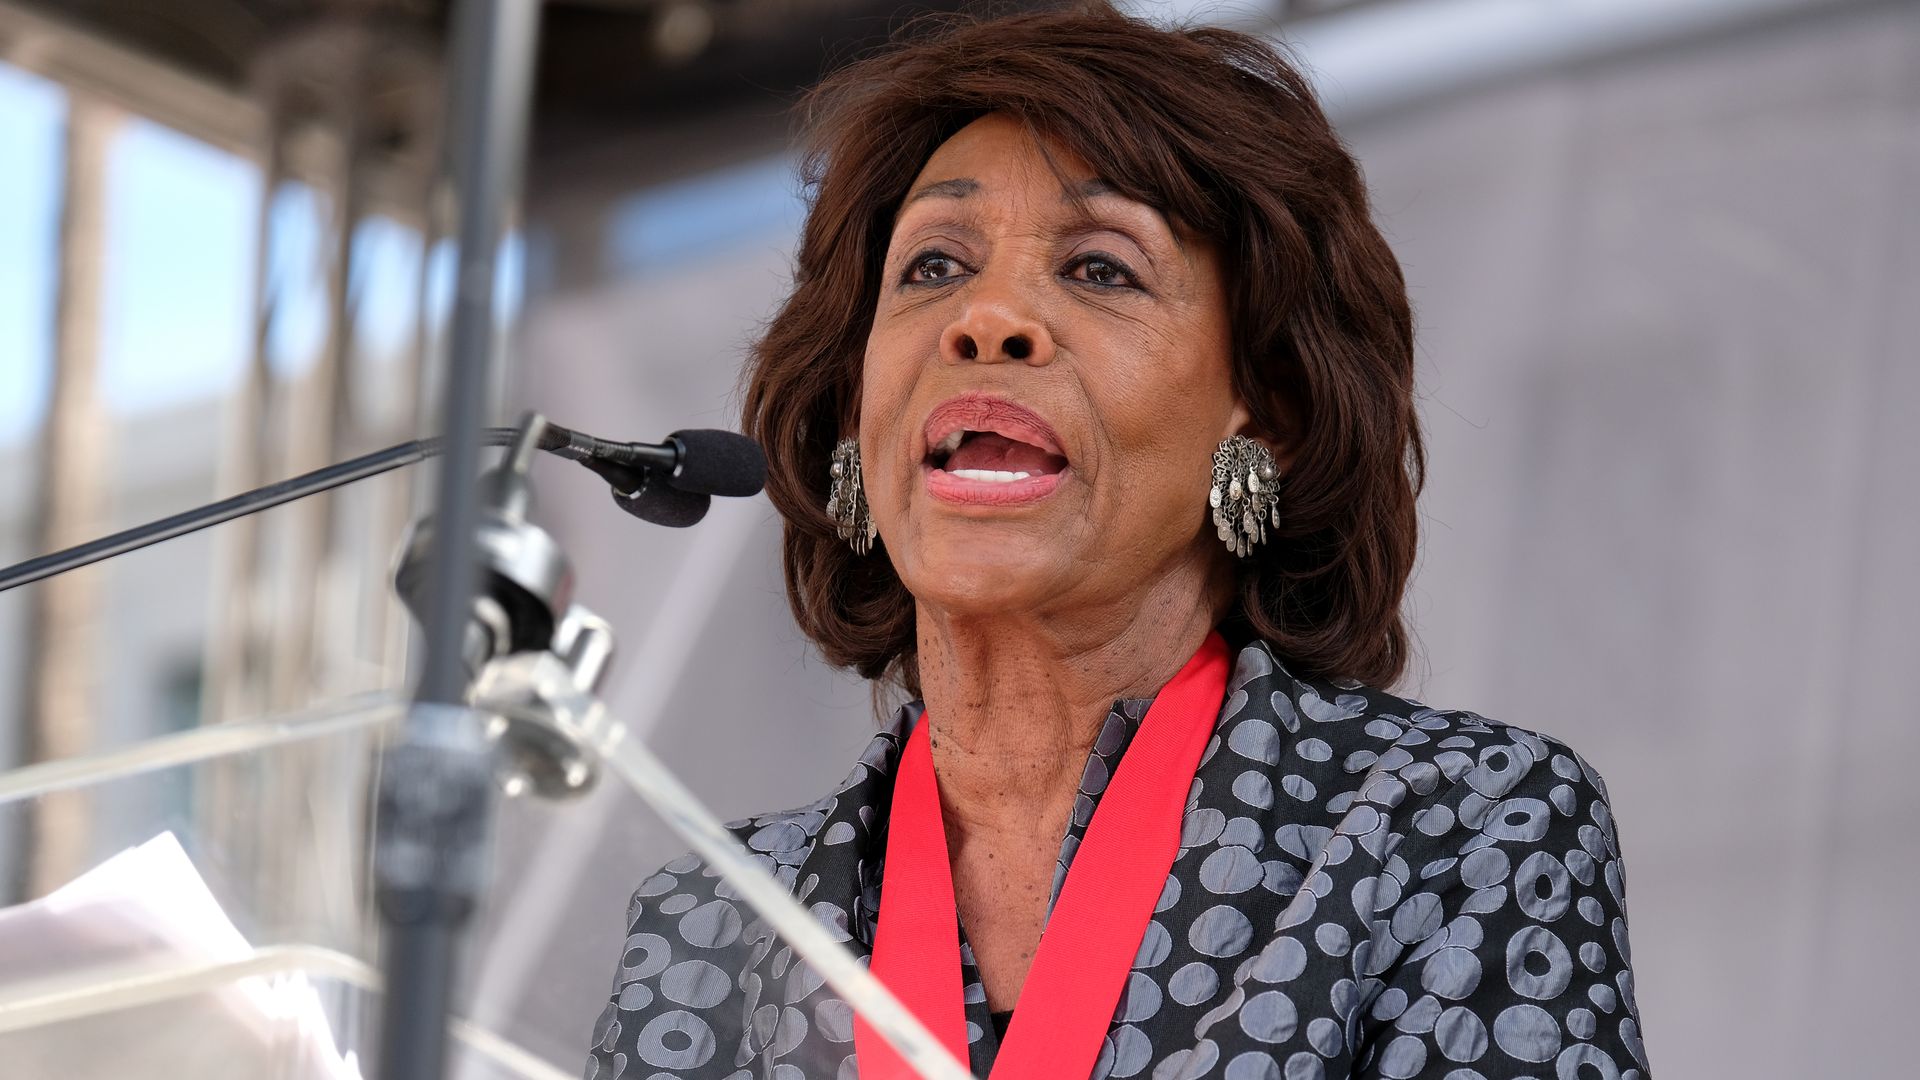 Congresswoman Maxine Waters speaks at the 4th Annual Women's March LA: Women Rising at Pershing Square on January 18, 2020 in Los Angeles, California.